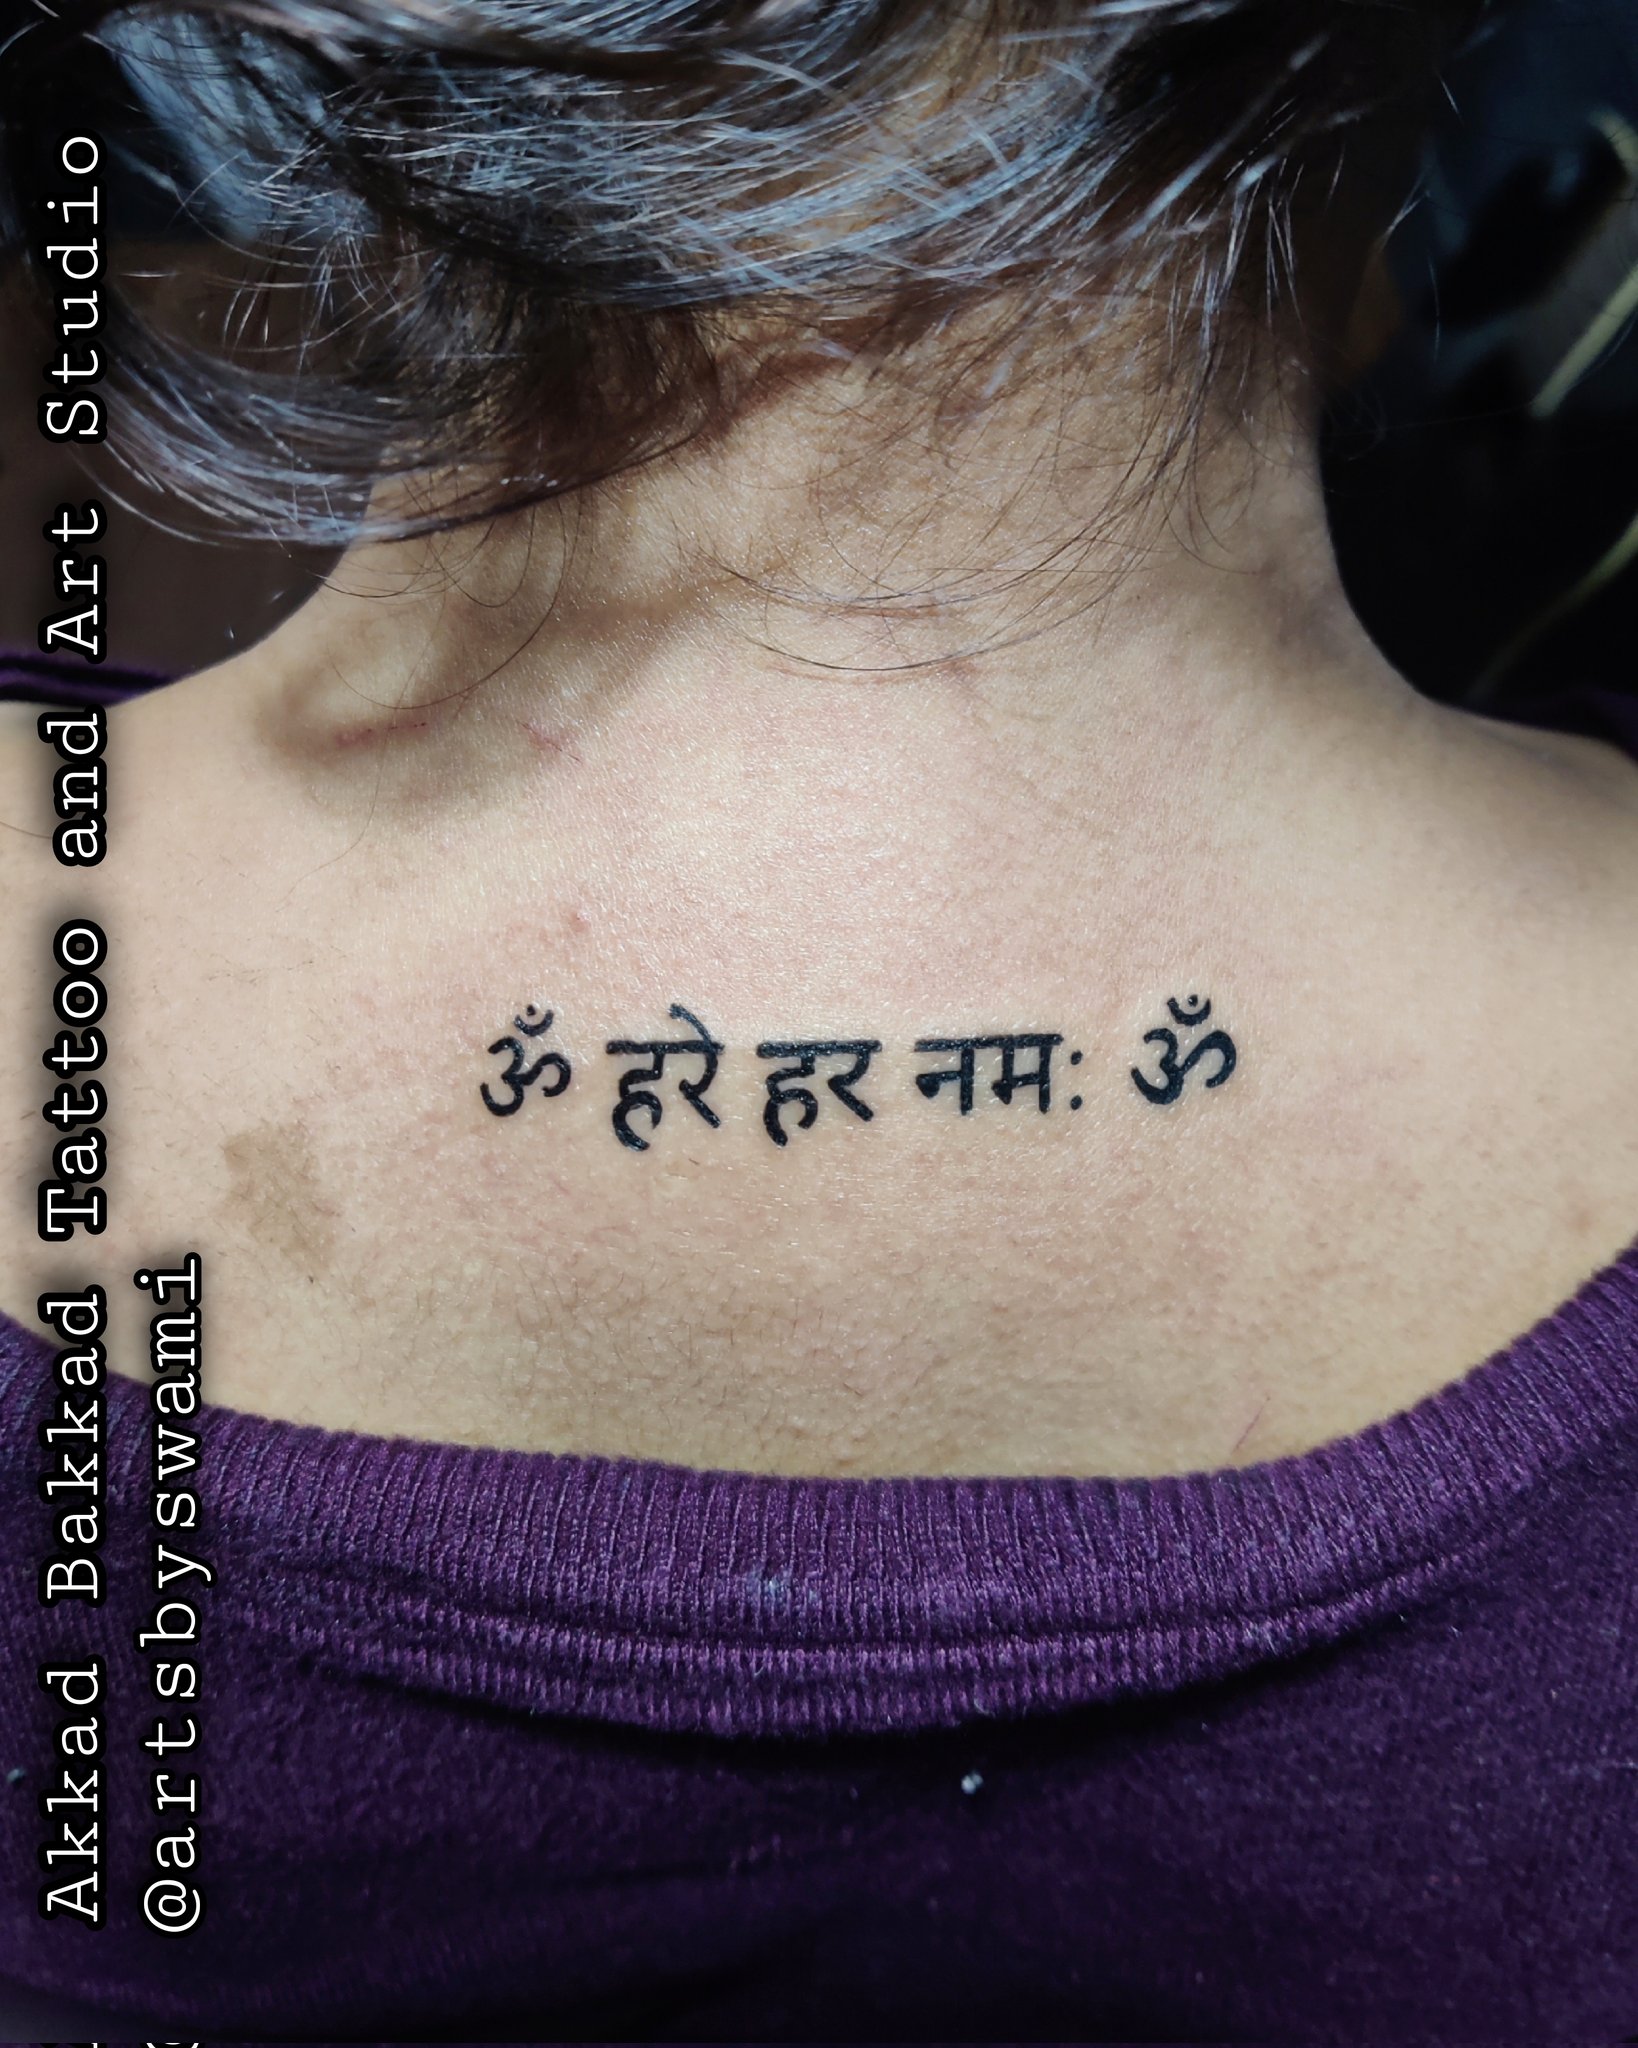 Karma Tattoo In Hindi With Circle Of Life by etishapatel on DeviantArt